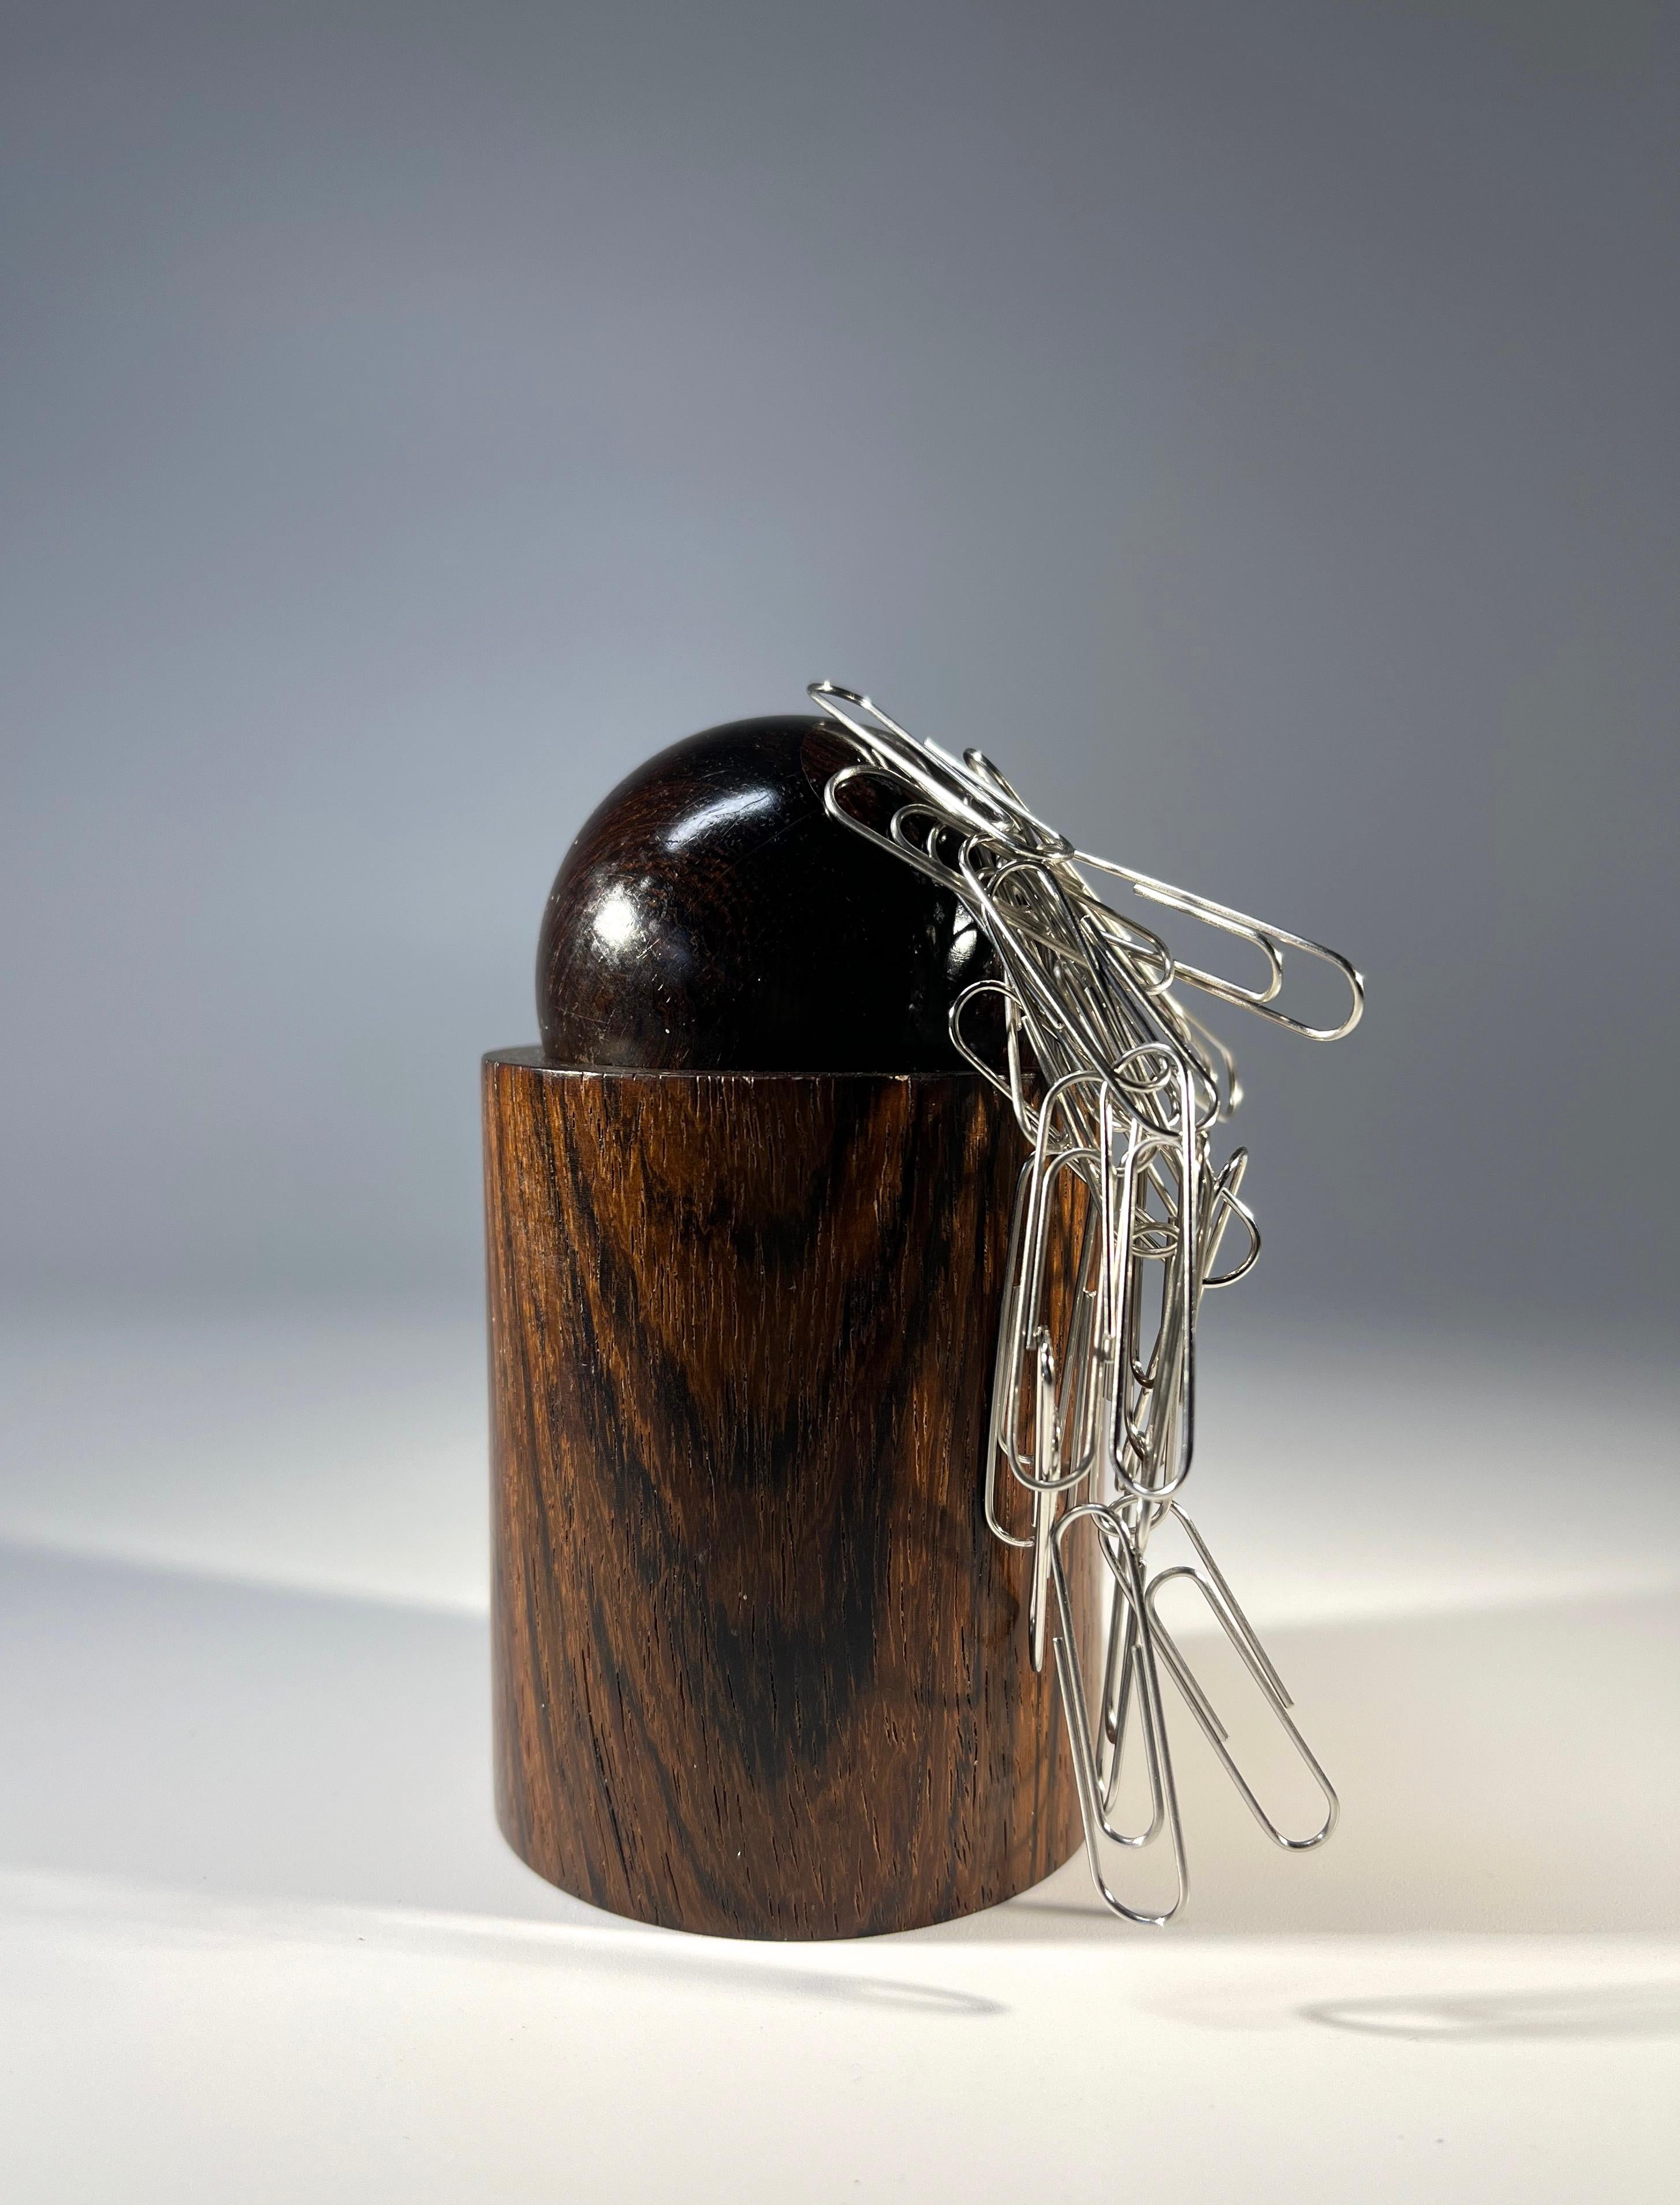 Ingenious magnetic paper clip holder designed by Sven Petersen for SAAP, Hillerod, Denmark
Crafted in a rich dark rosewood, the ball of the pot is magnetised to gather paperclips
Scandinavian finest form and function
Circa 1960's
Height 4 inch,